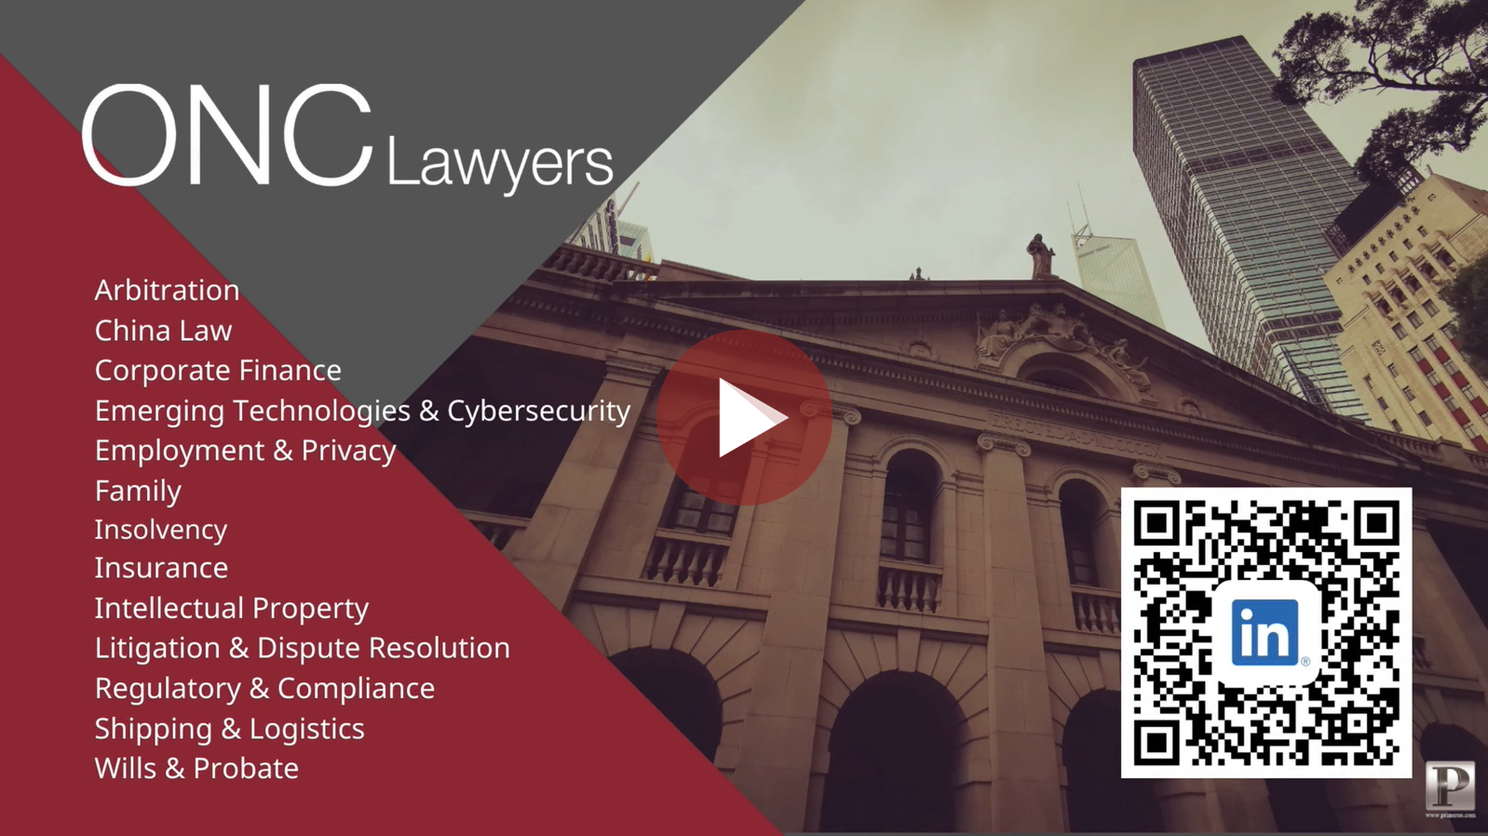 ONC Lawyers’ introductory clip featured on Primerus platform for the Virtual ACC Annual Conference 2021